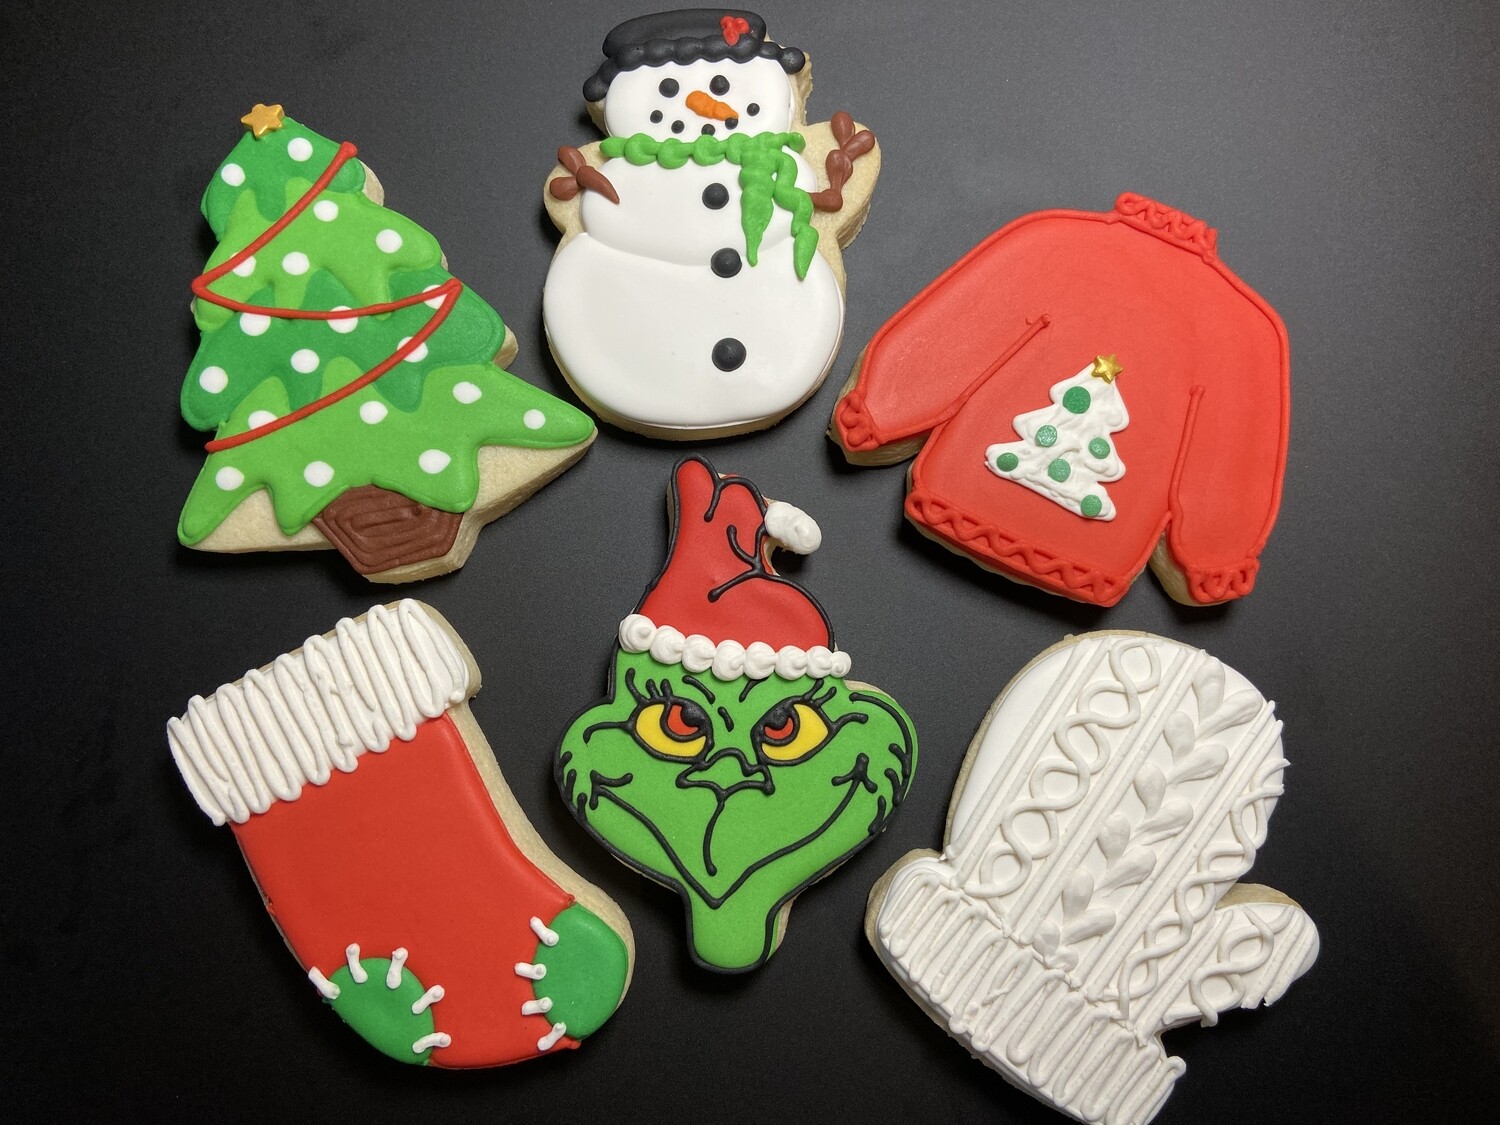 'A Grinch Christmas' Decorating Workshop - SUNDAY, DECEMBER 15, 2019 at 3:00 p.m. (THE POTPOURRI HOUSE)